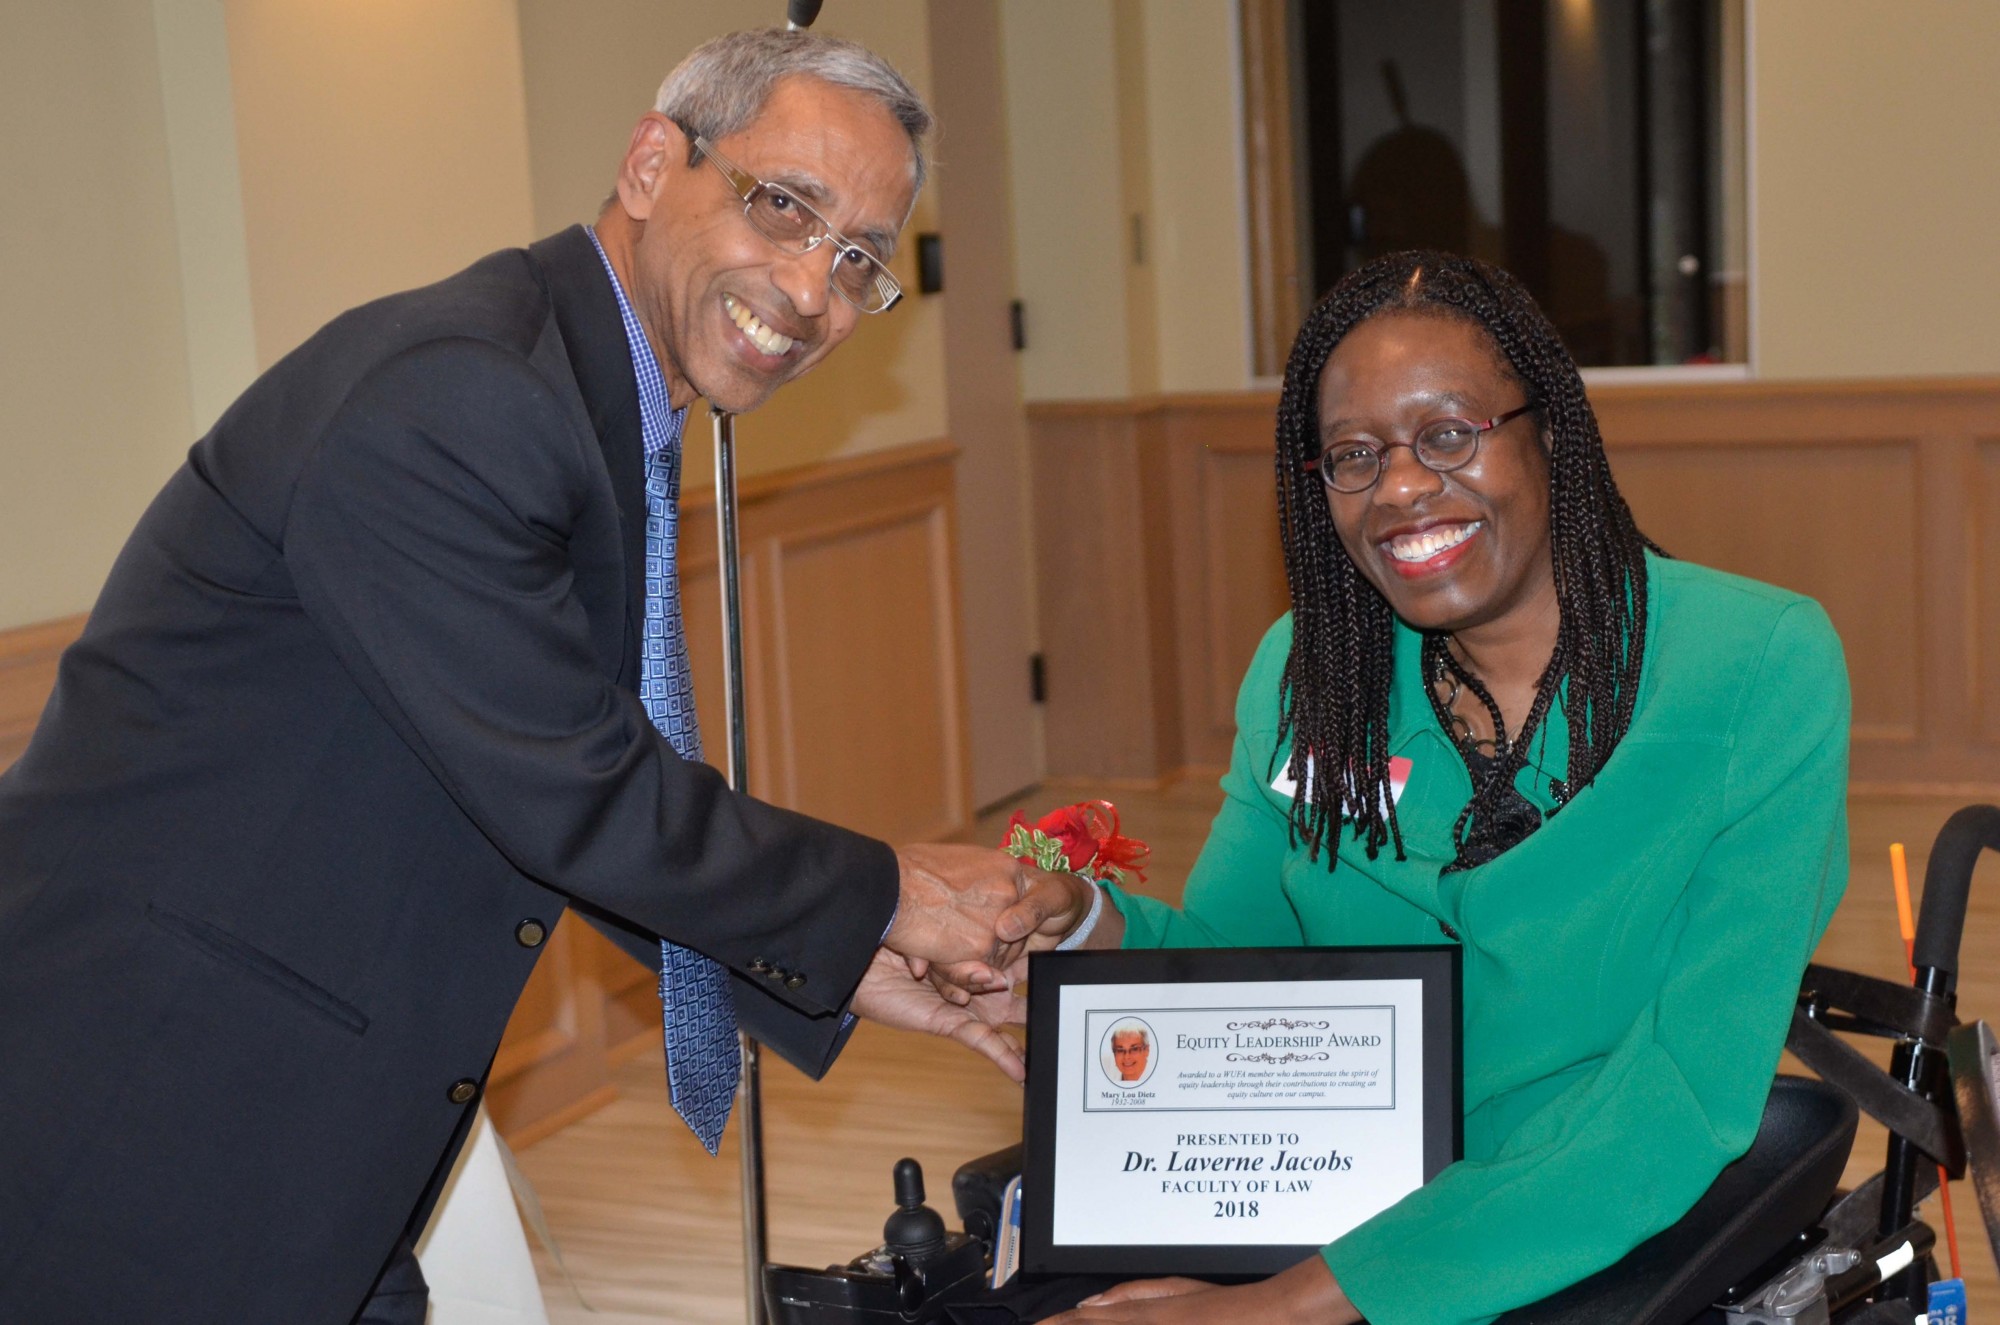 Professor Laverne Jacobs receives the Mary Lou Dietz Equity Leadership Award